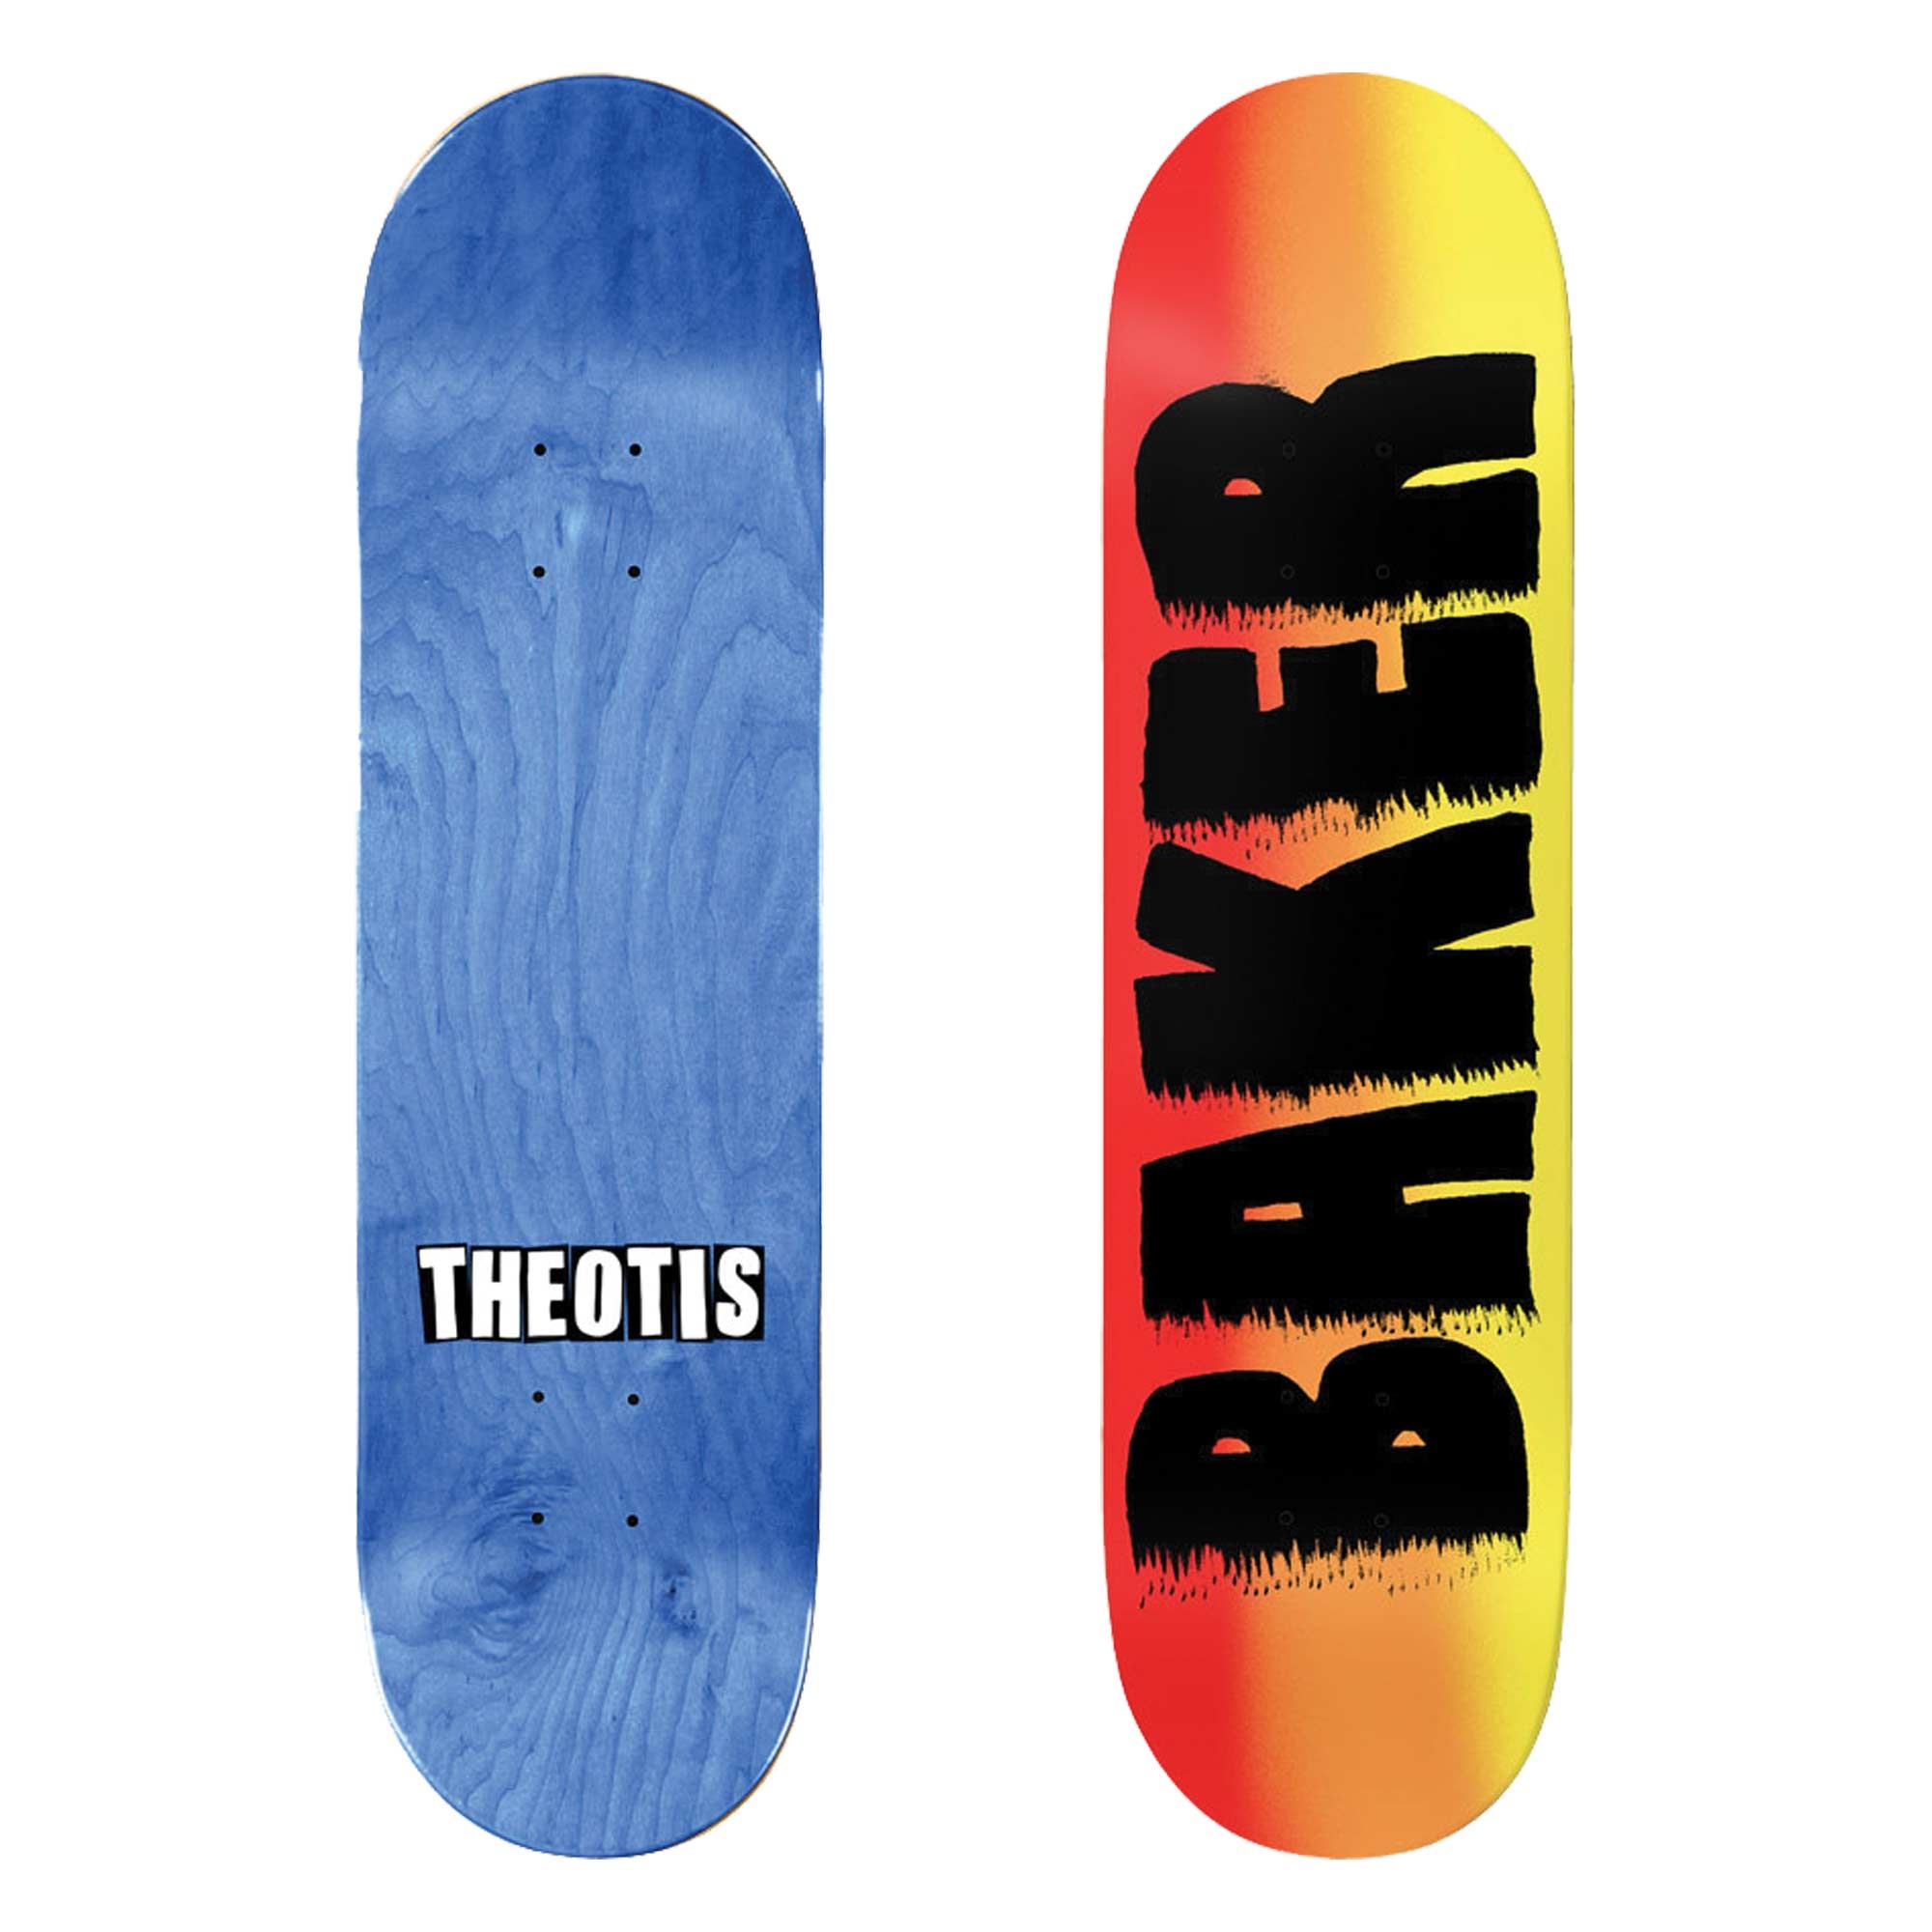 BAKER Deck JAMMYS TB 8.0, red/yellow 8.0''